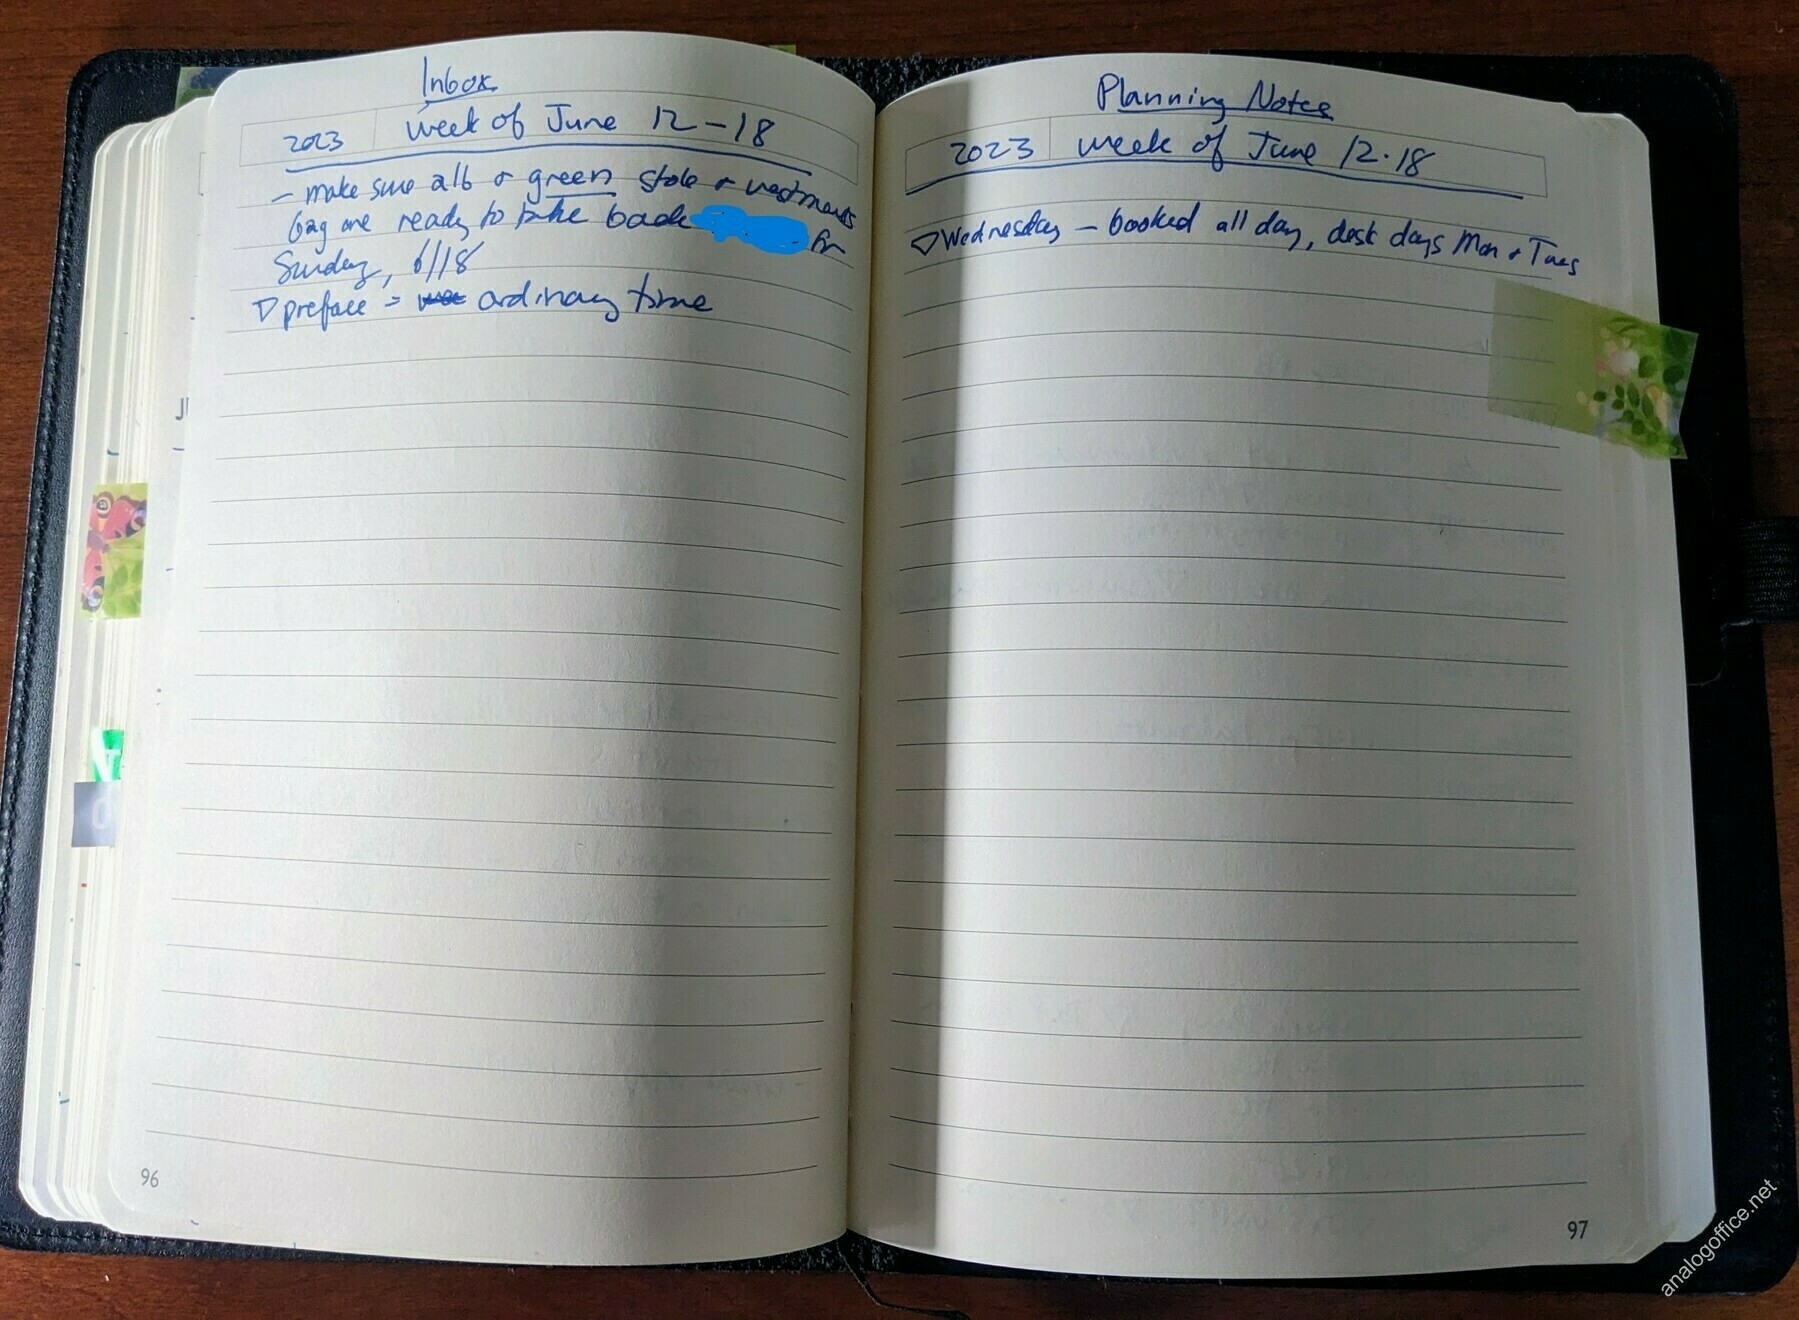 handwritten notebook pages with inbox and planning notes sections